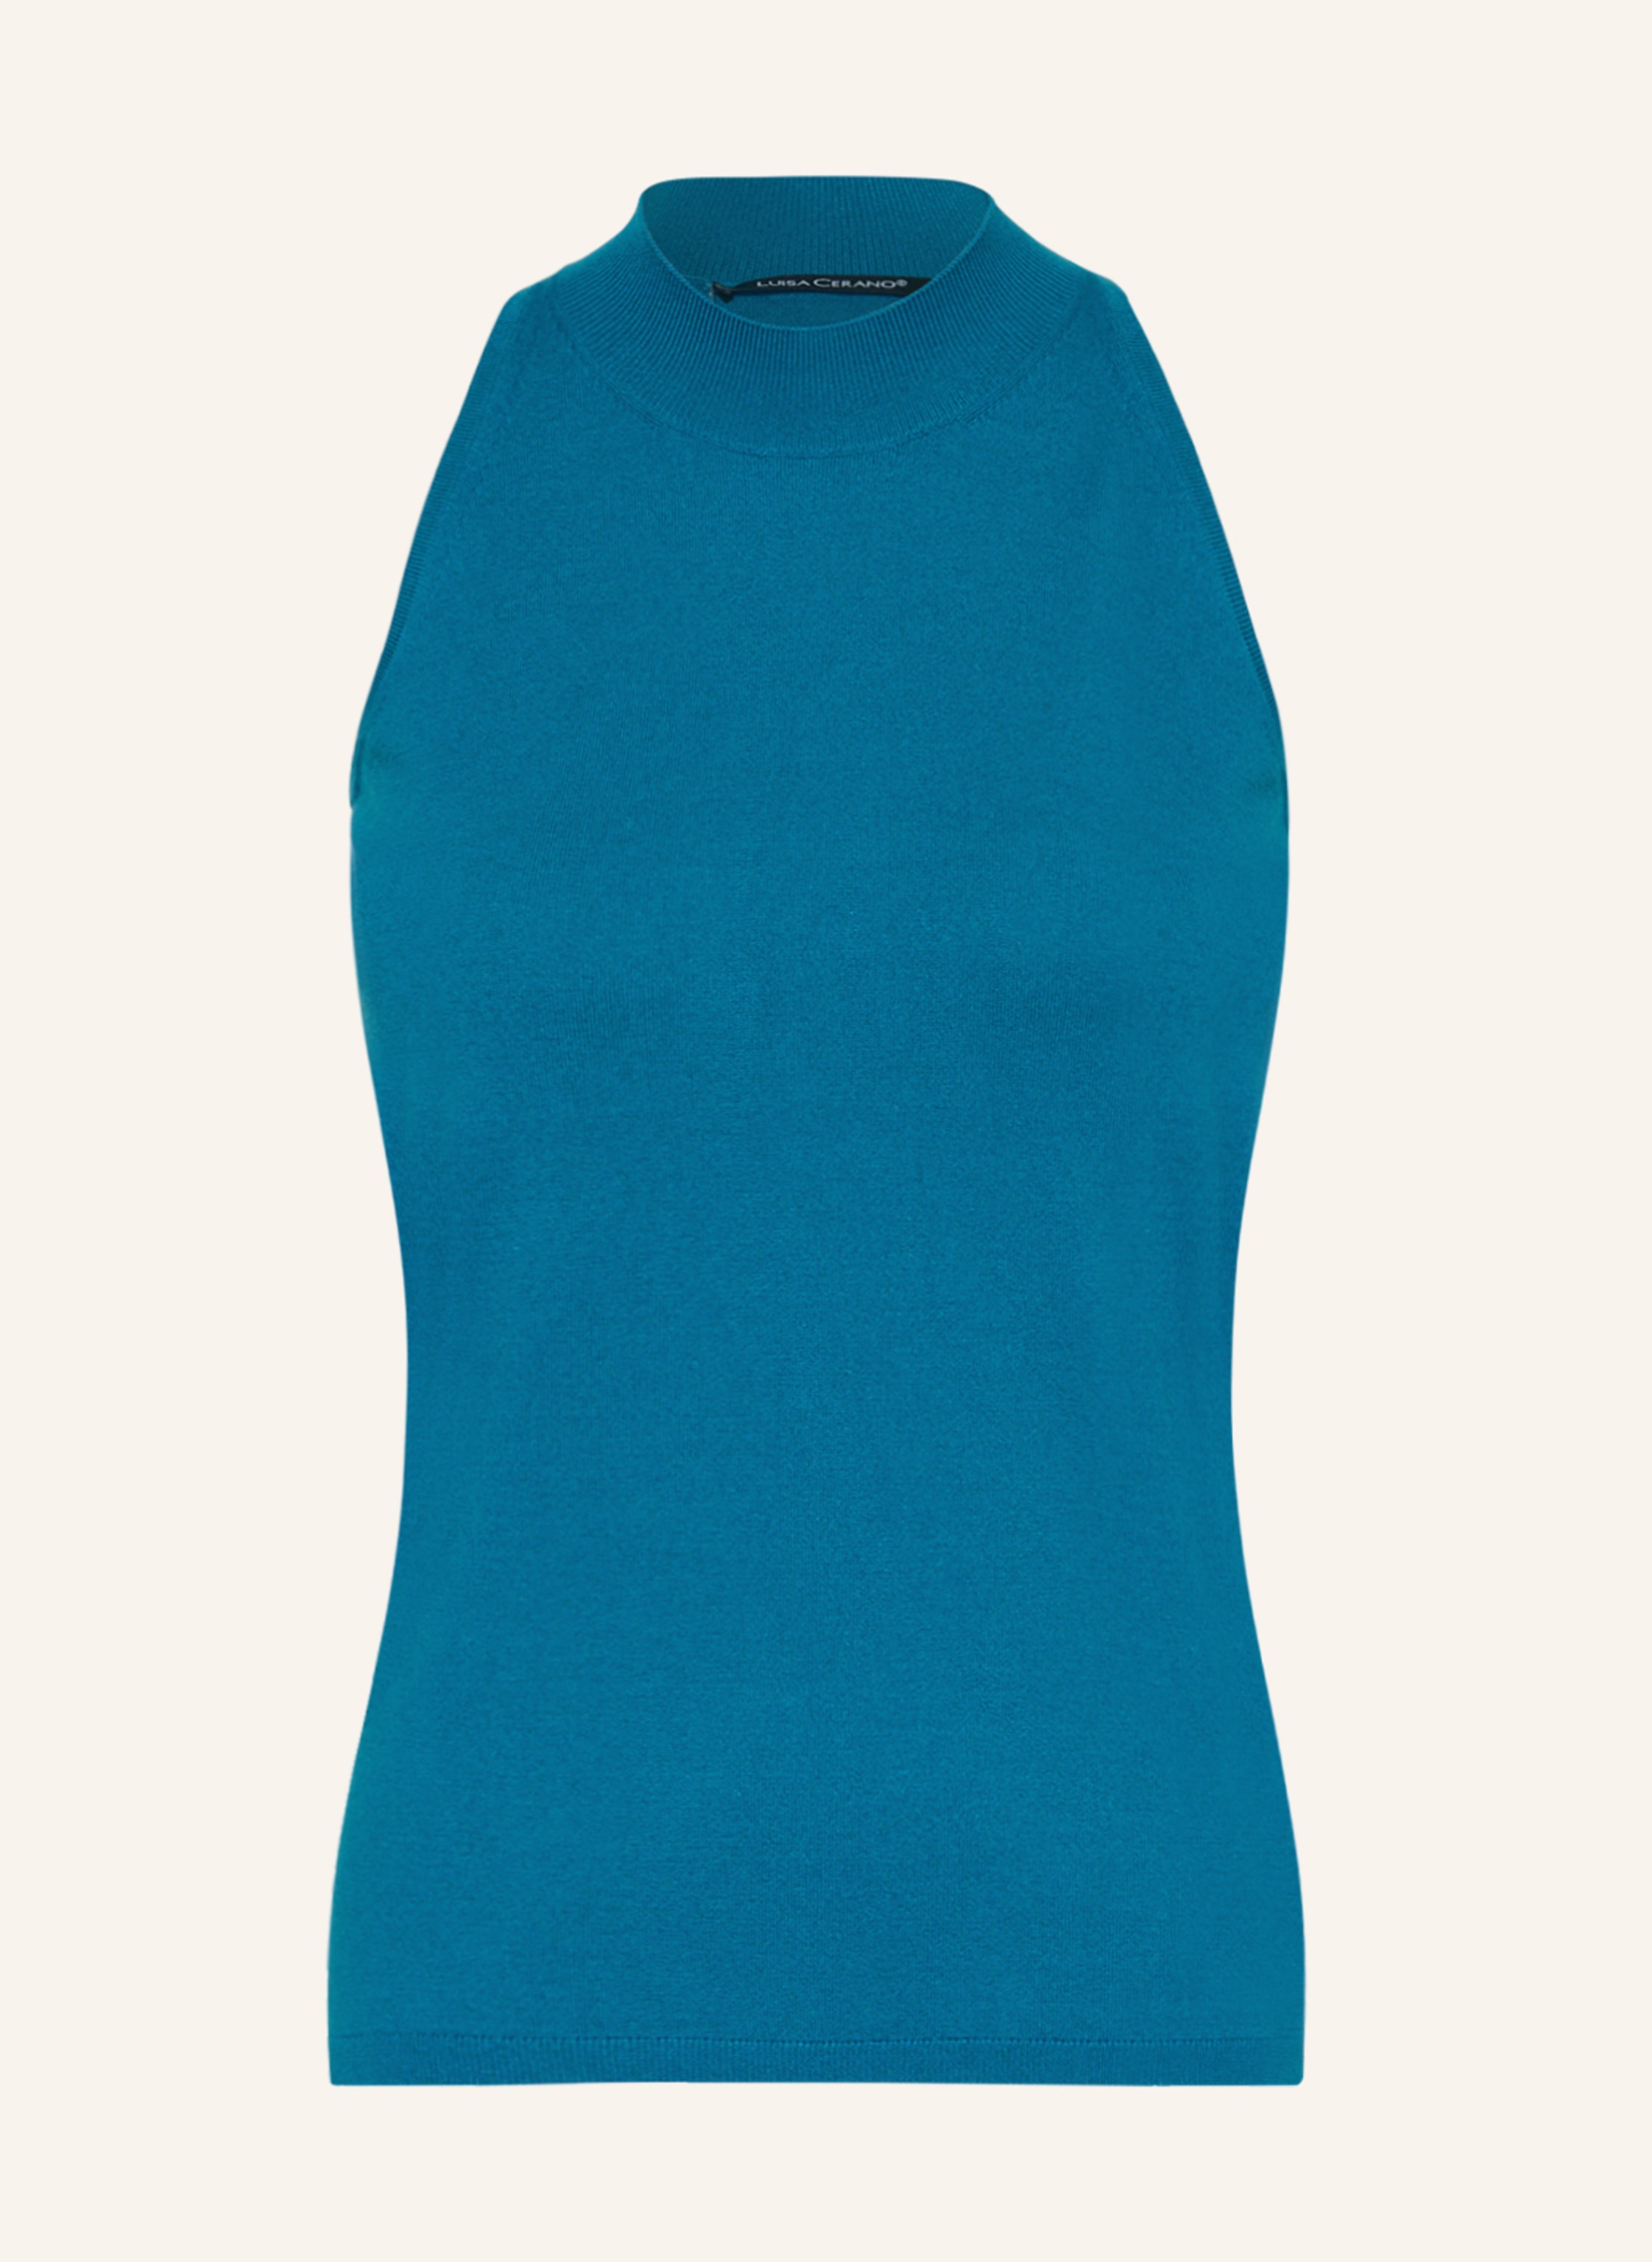 LUISA CERANO Knit top in turquoise